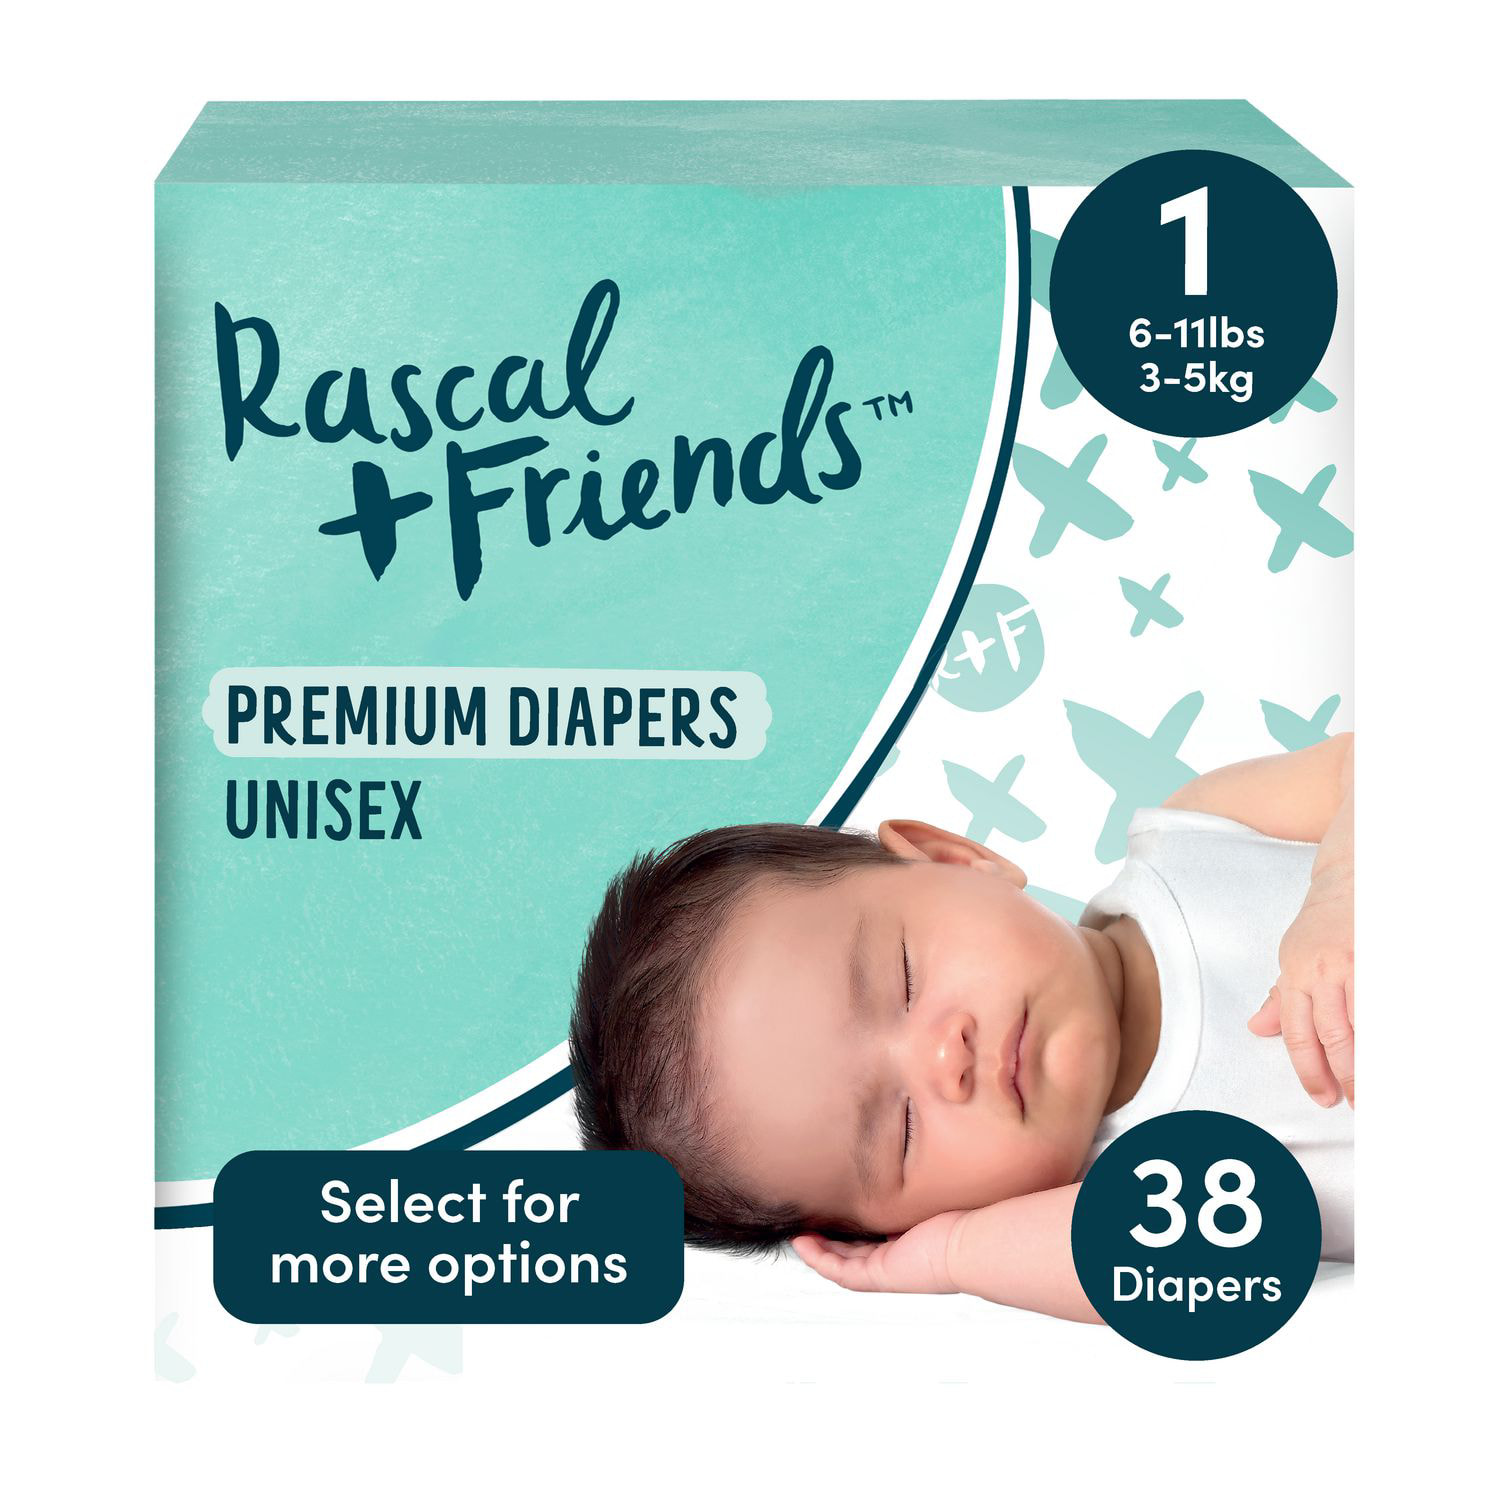 When seriously good diapers, training pants & wipes speak for